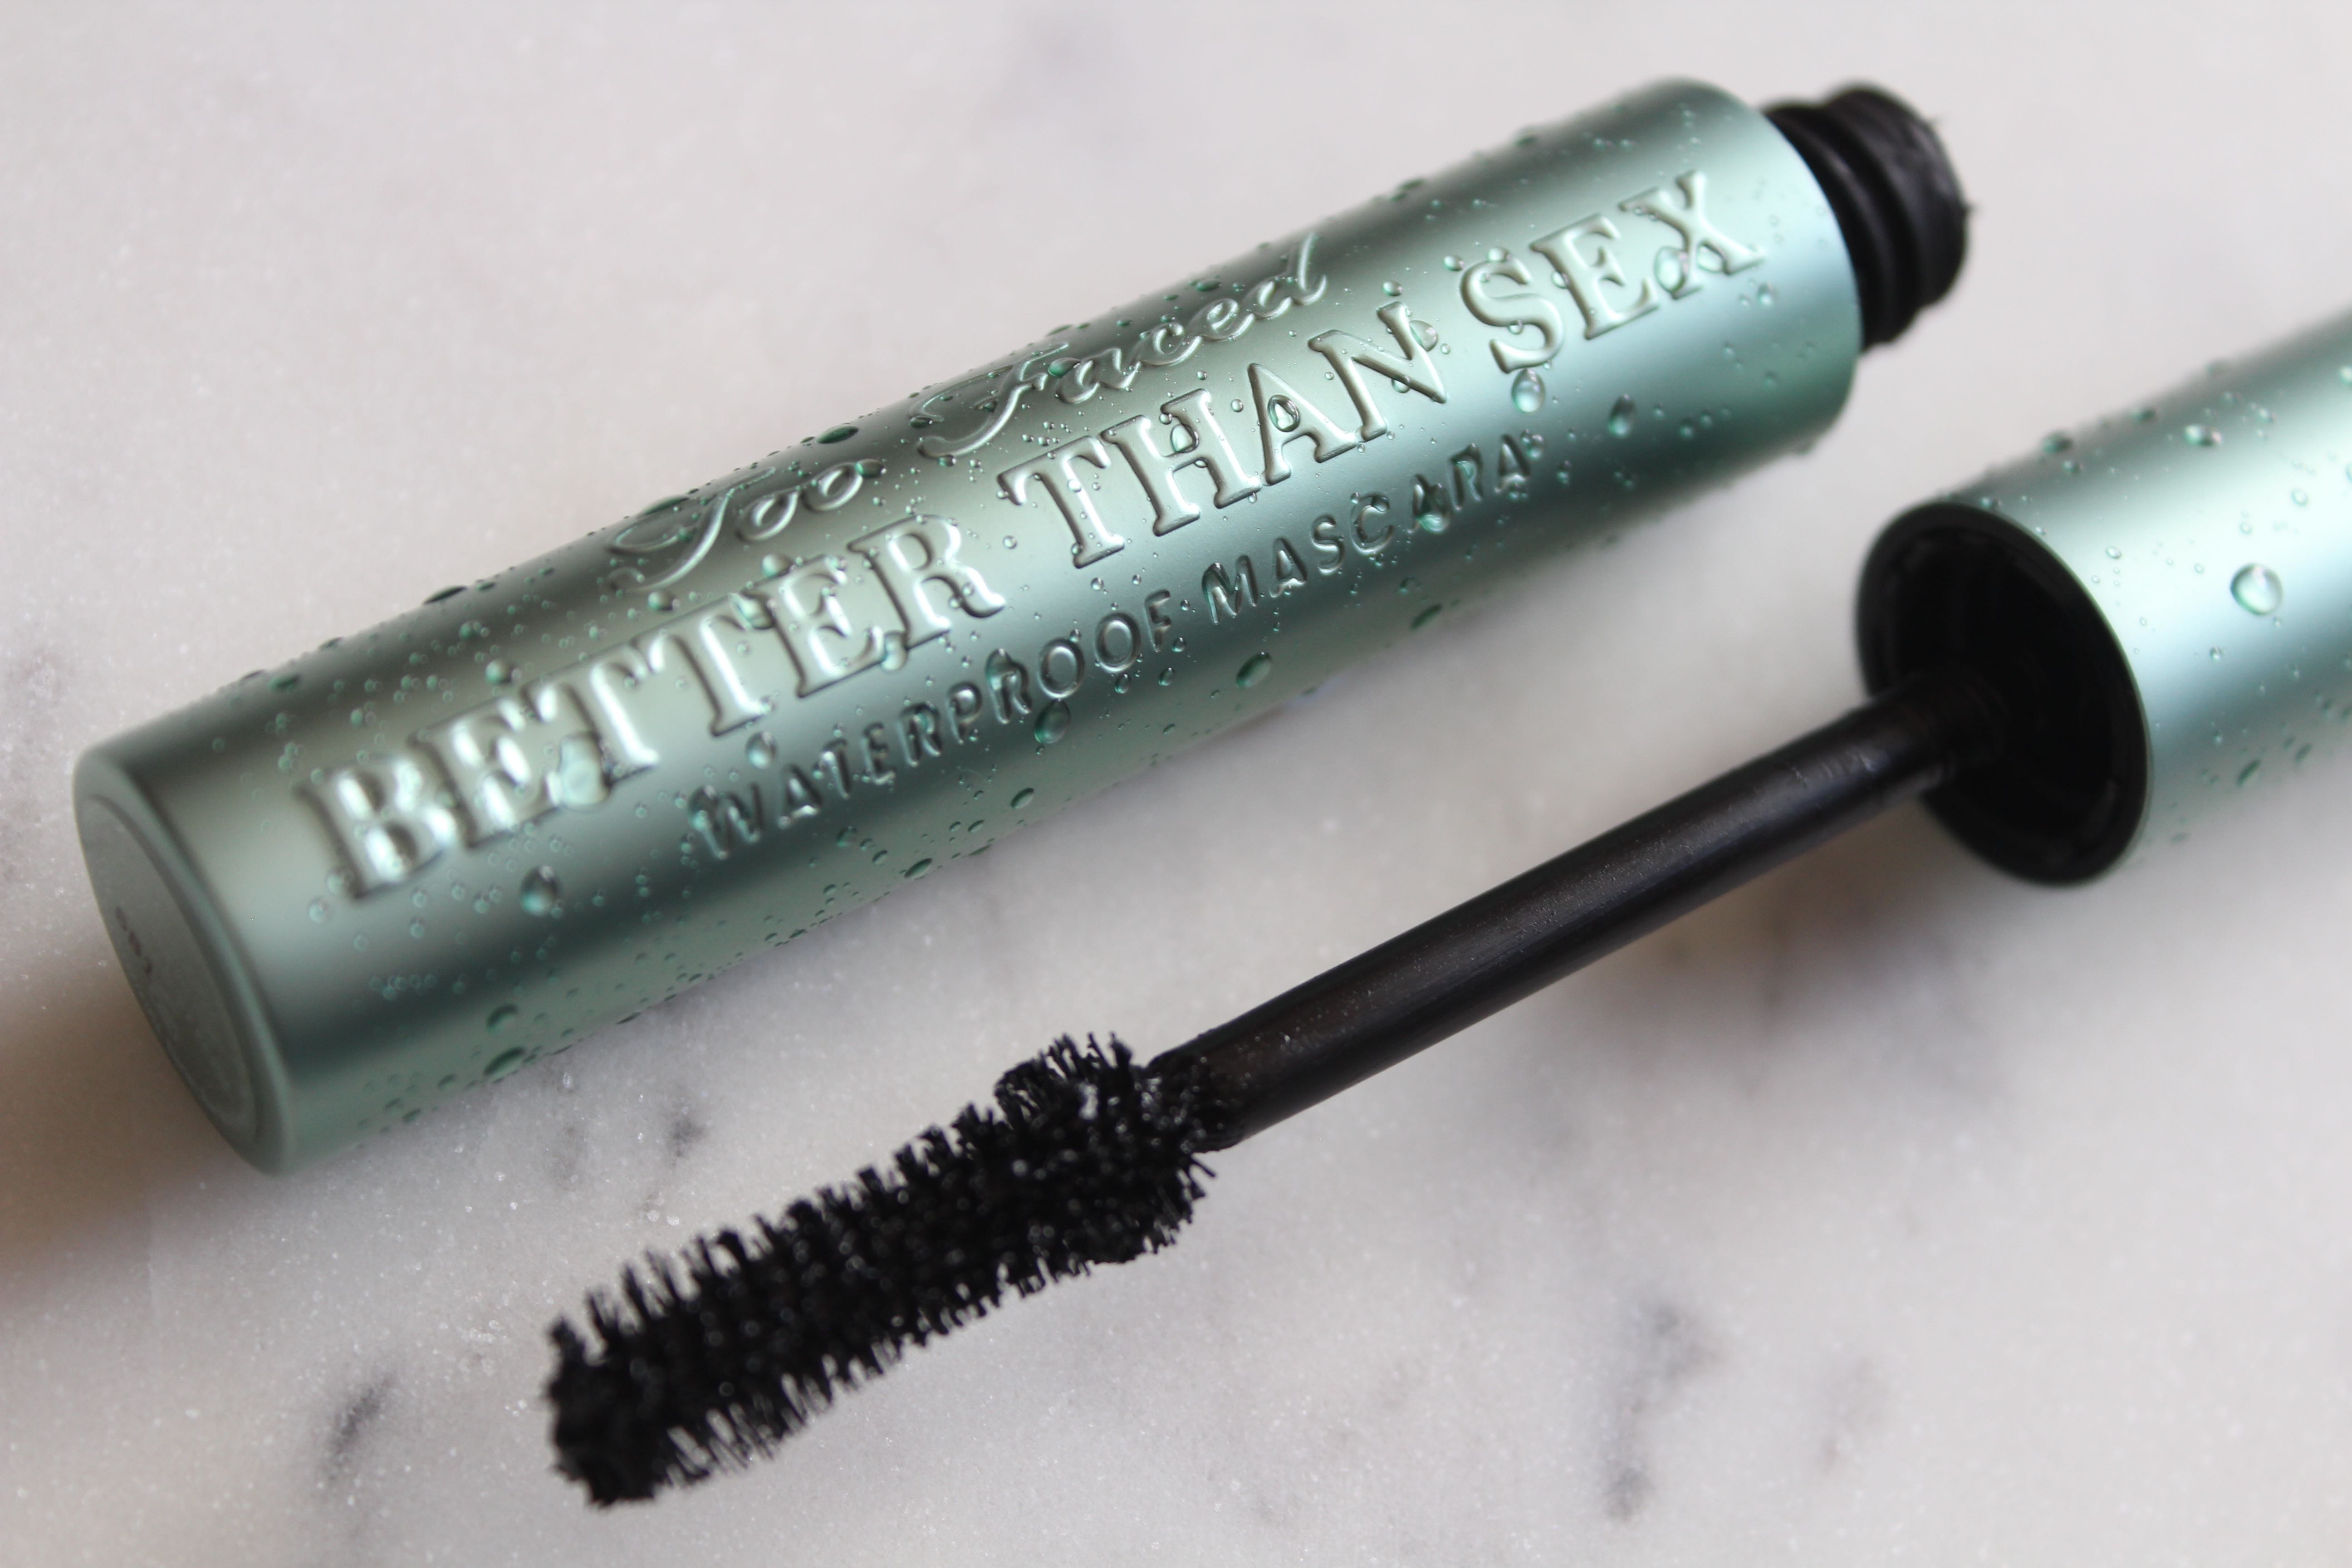 licens skrivning forælder Too Faced Better Than Sex Waterproof Mascara Review - Face Made Up - Beauty  Product Reviews, Makeup Tutorial Videos & Lifestyle